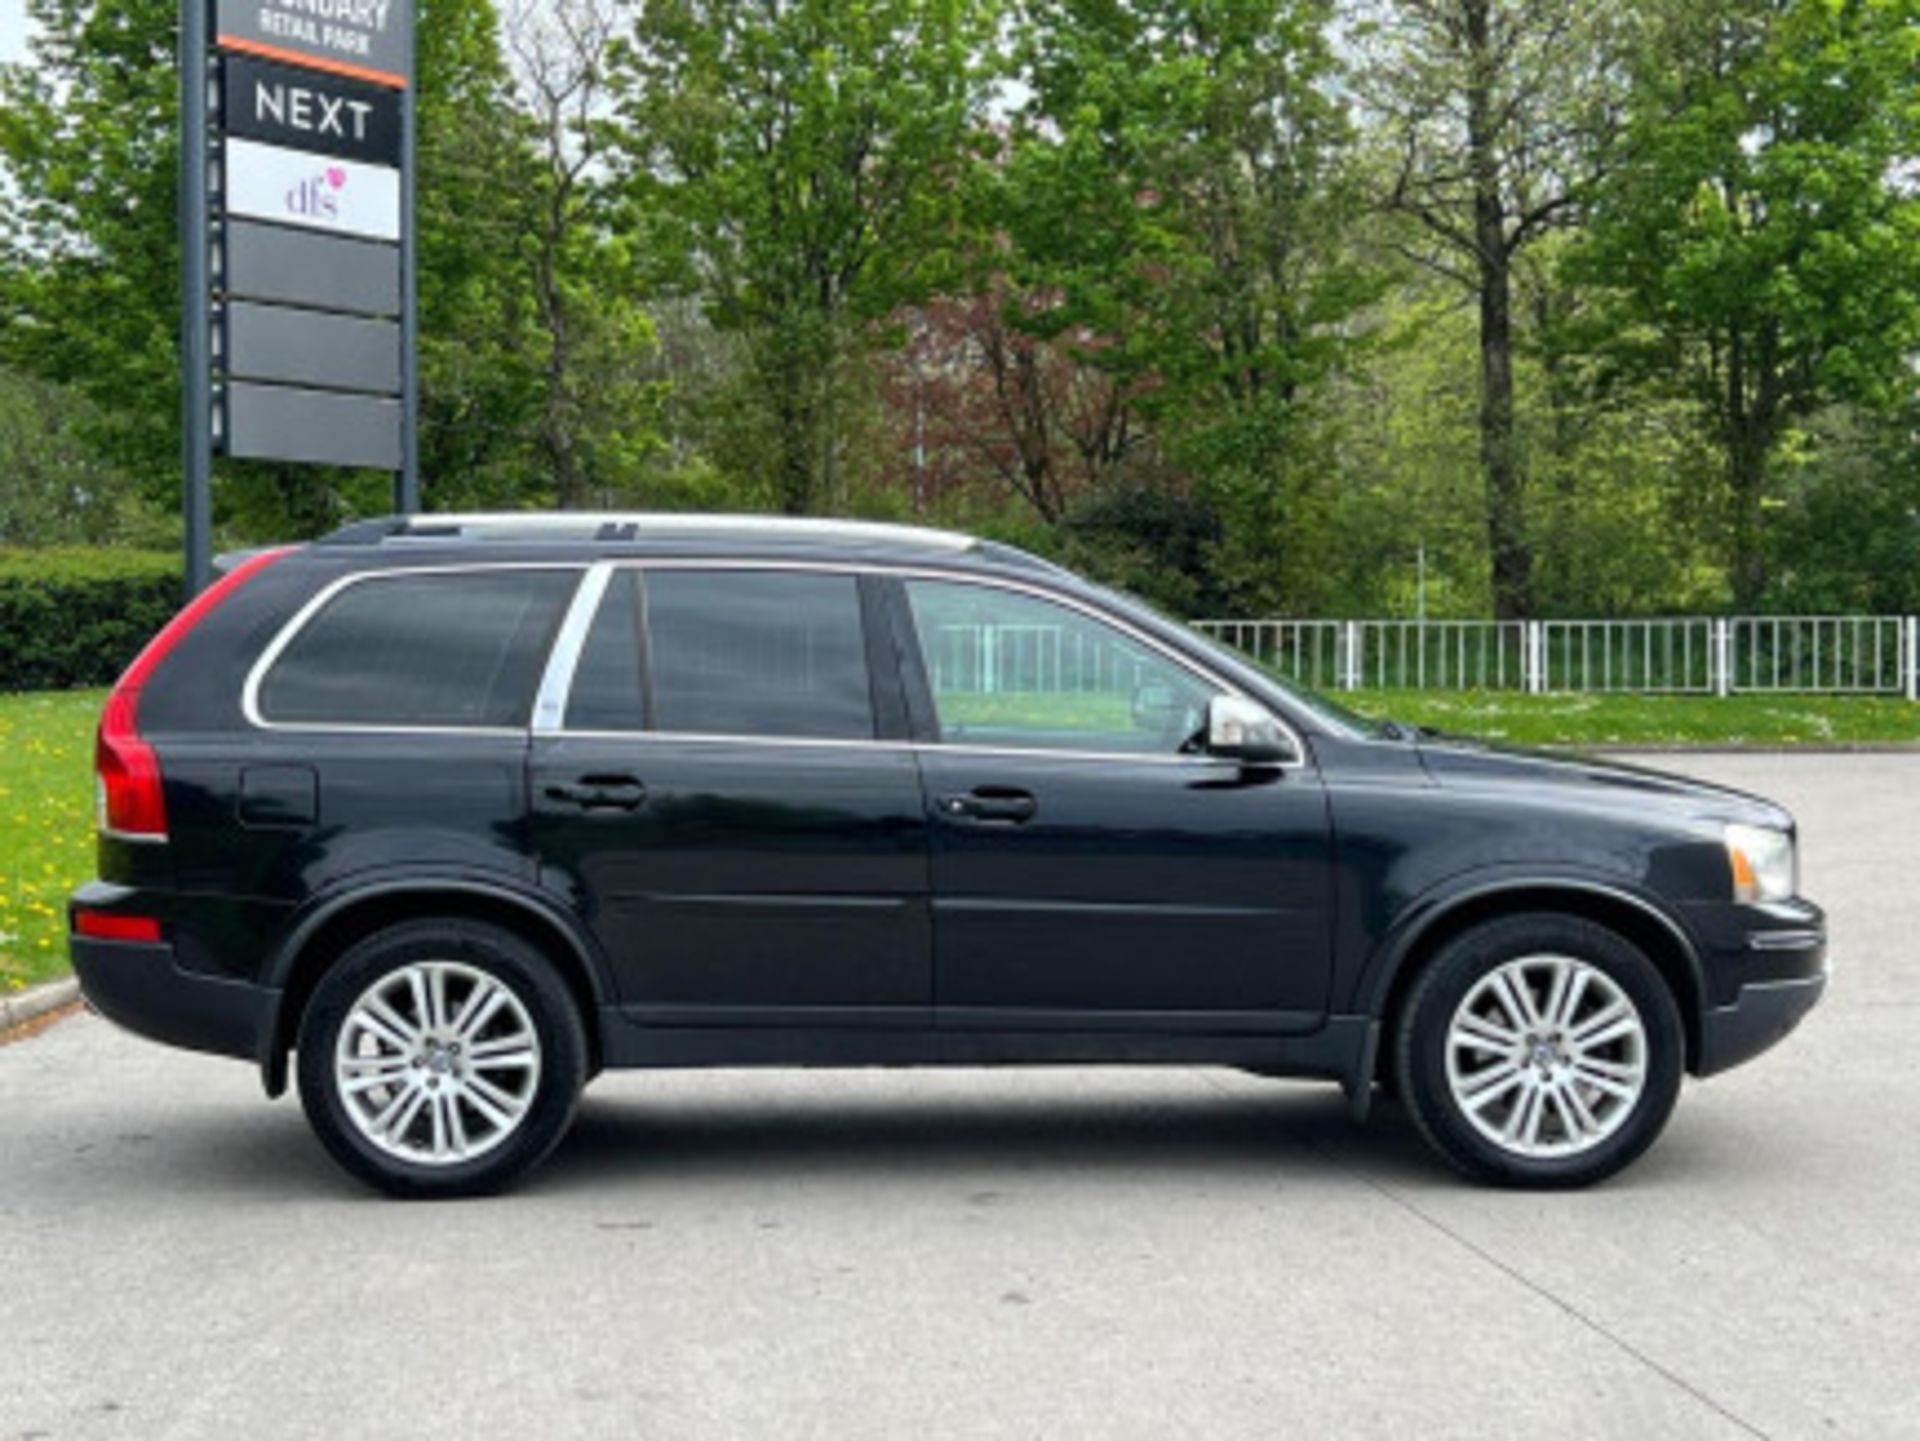 VOLVO XC90 2.4 D5 EXECUTIVE GEARTRONIC AWD, 5DR >>--NO VAT ON HAMMER--<< - Image 73 of 136